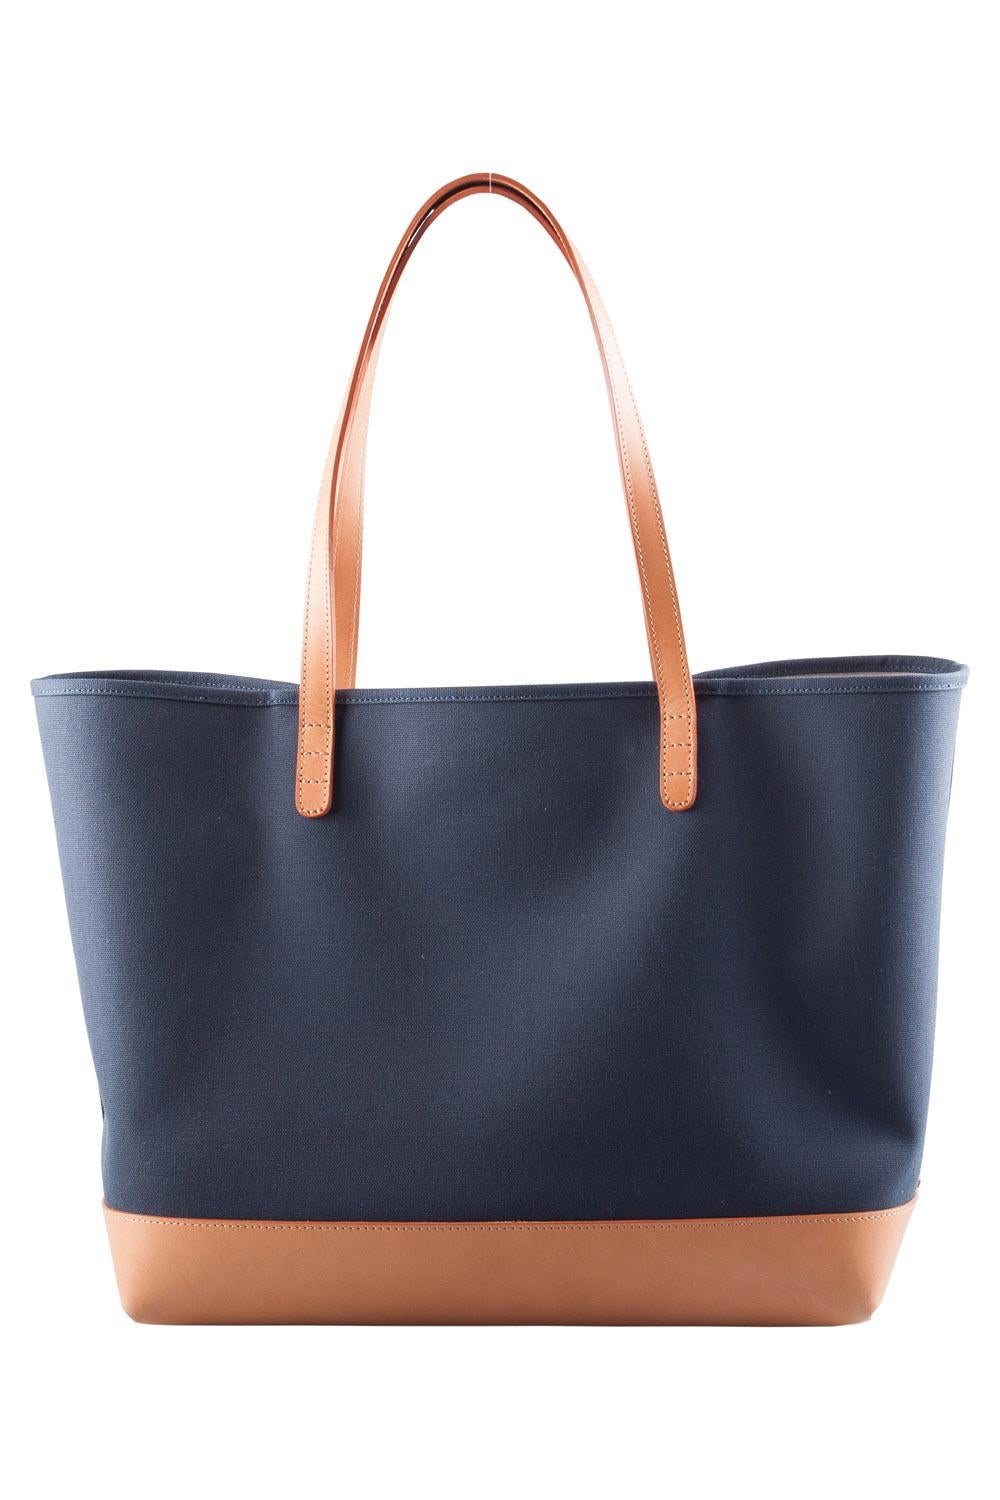 Black Mansur Gavriel Blue/Cream and Cammello Canvas and Leather Tote